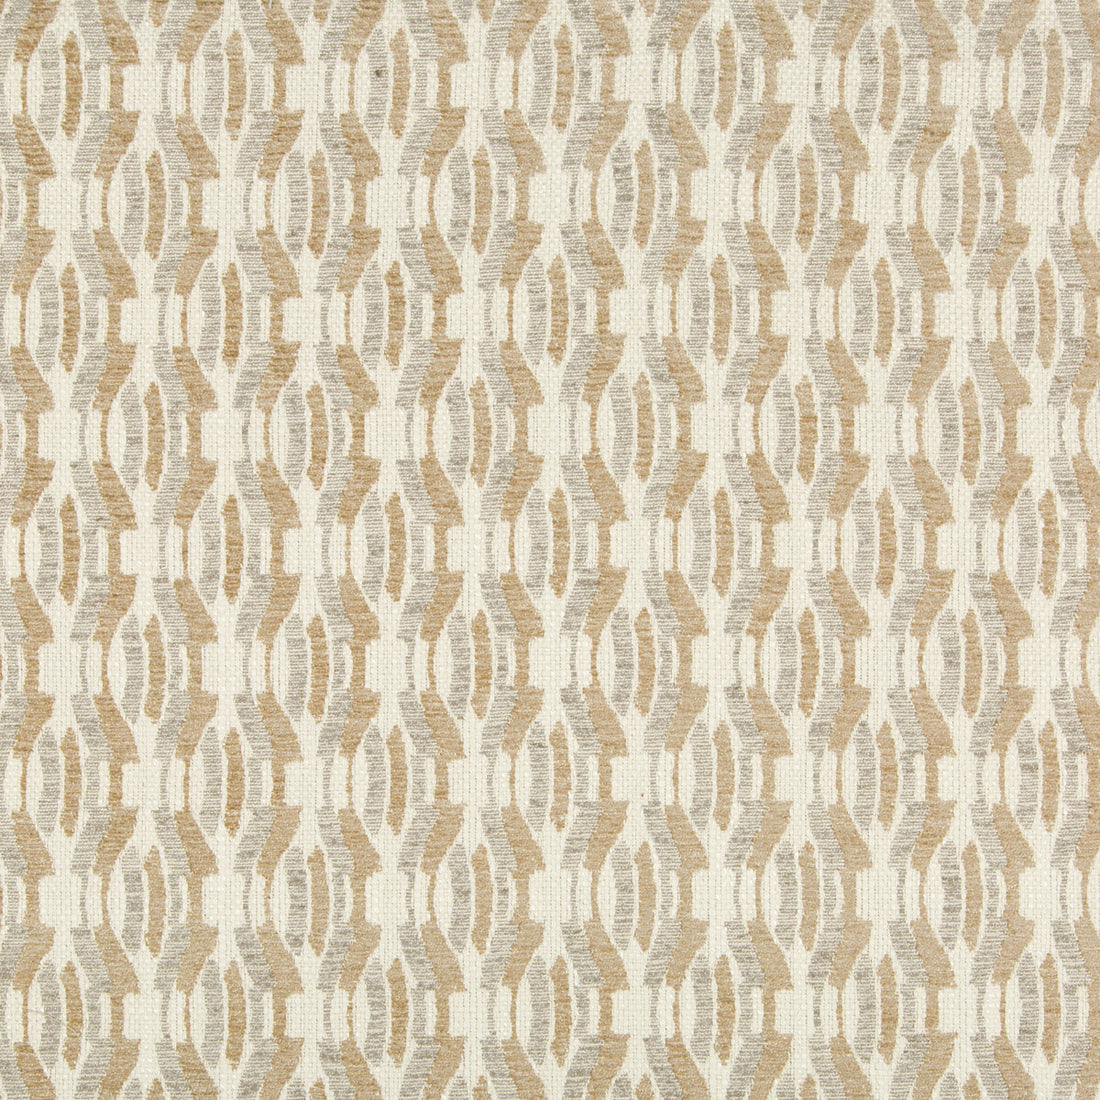 Agate Weave fabric in natural color - pattern GWF-3748.116.0 - by Lee Jofa Modern in the Gems collection